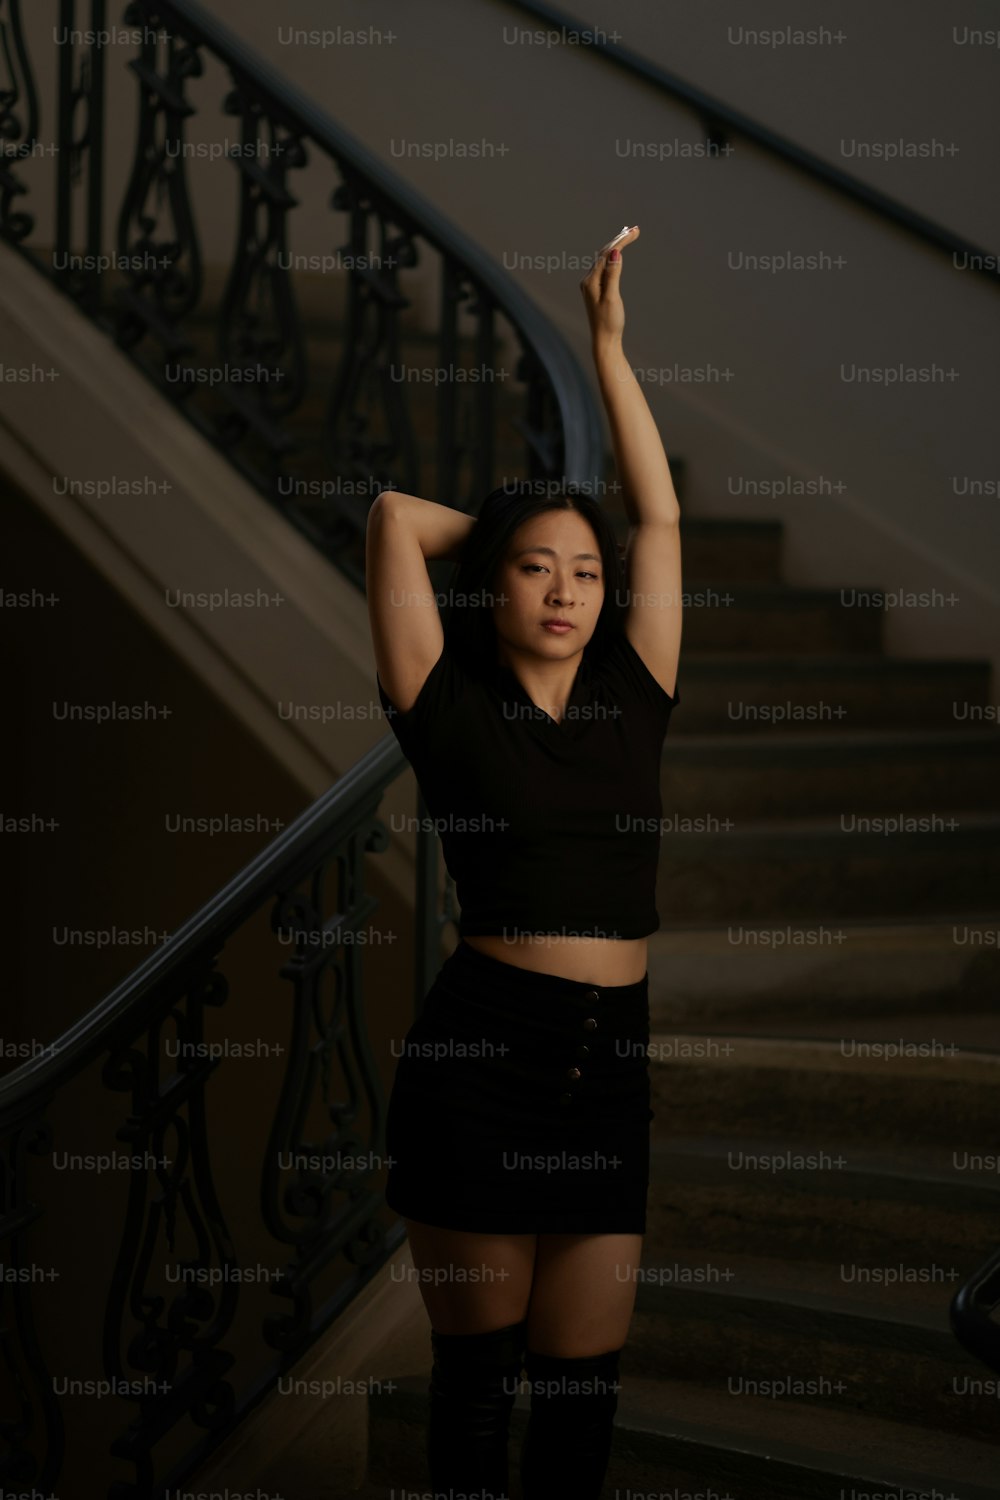 a woman in a black top and skirt standing in front of a stair case